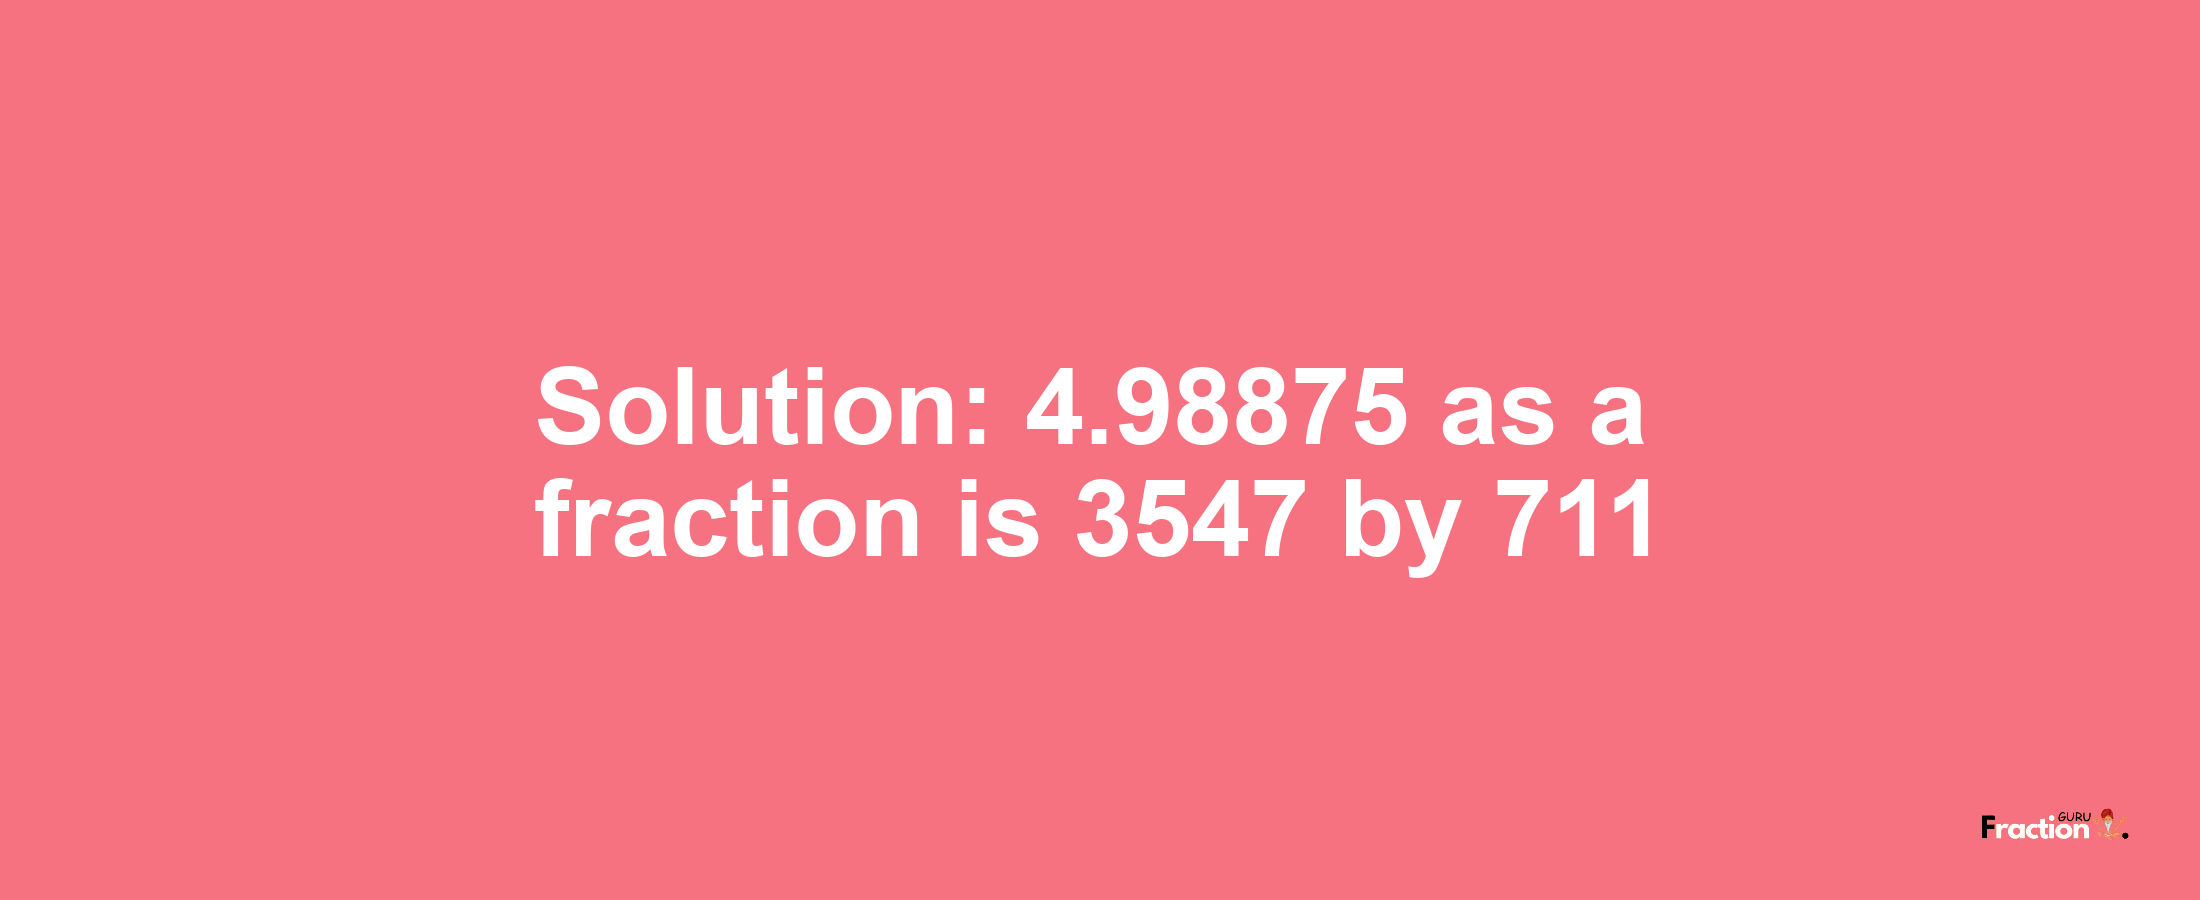 Solution:4.98875 as a fraction is 3547/711